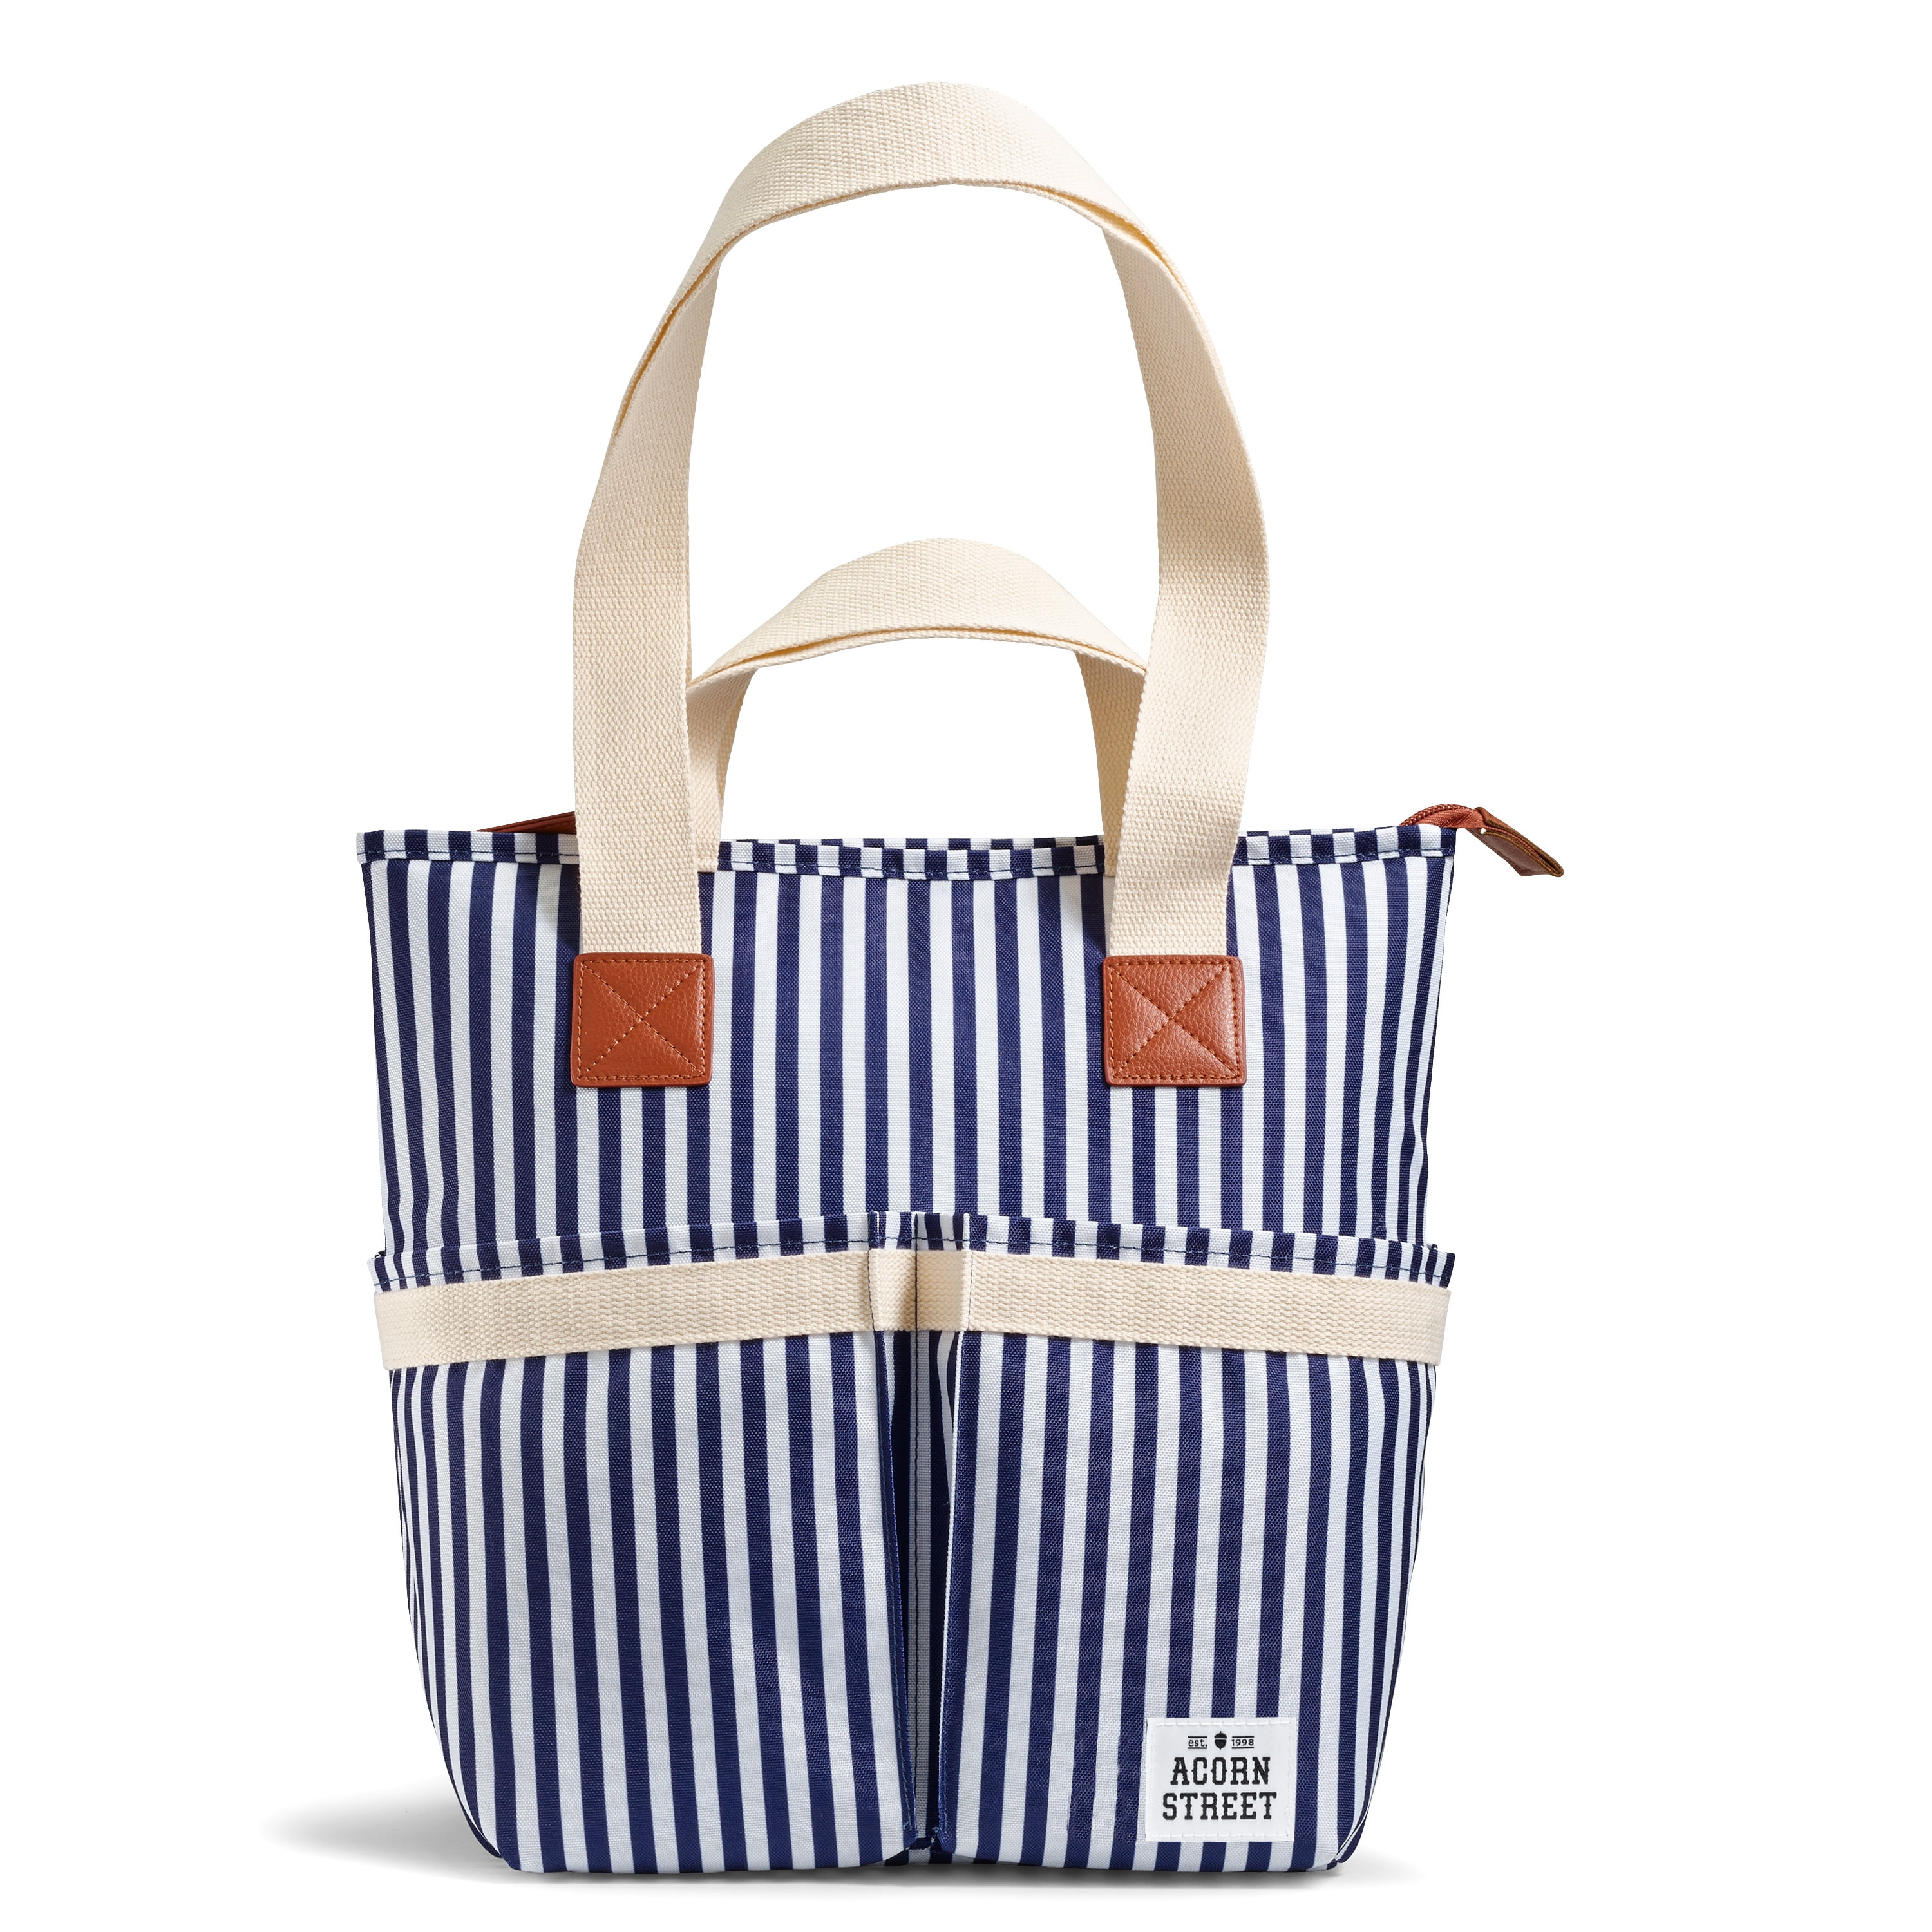 Acorn Street Insulated Cooler Tote Bag with Removable Divider, Navy Vineyard Stripe, Size: One size, Blue